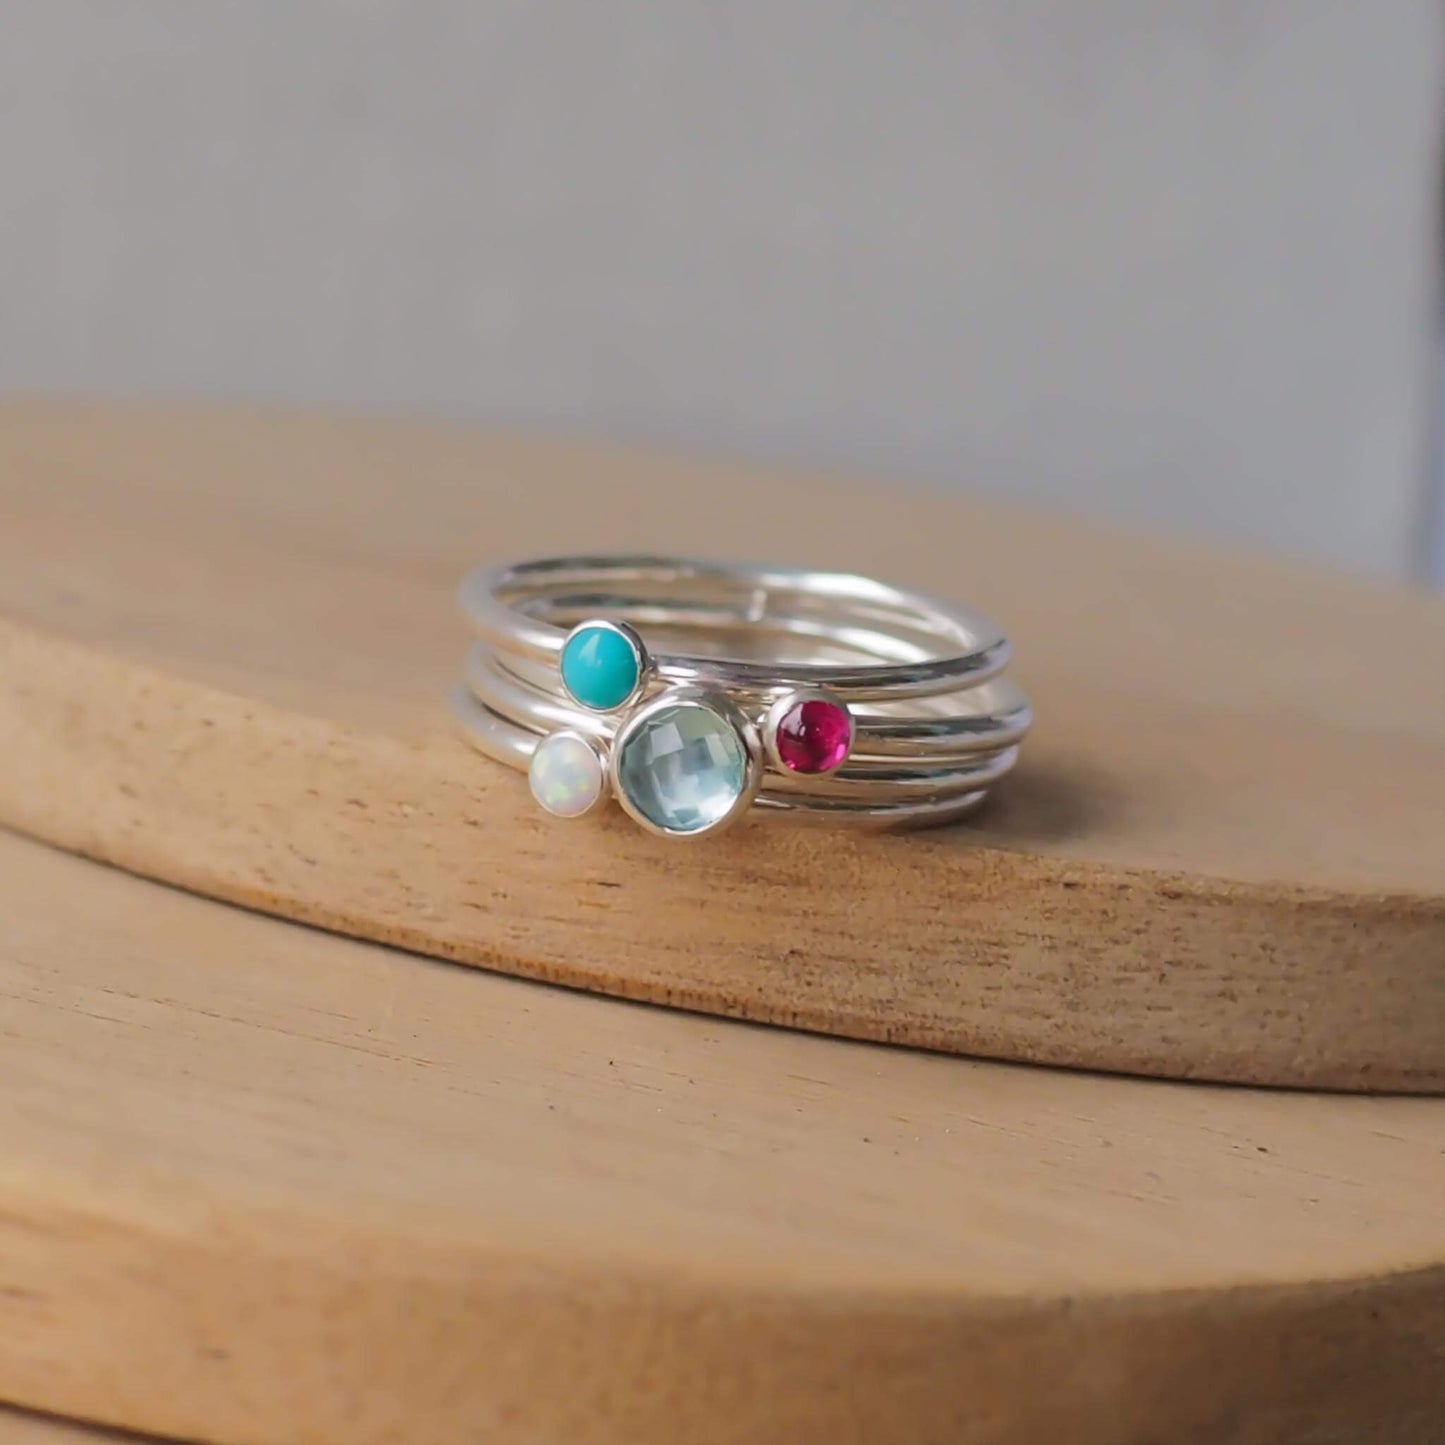 Three Birthstone RIng set with Blue Topaz, Lab Opal and Turquoise to mark March, October and Turquoise Birthdays. The three rings are made with Sterling Silver and a 5mm blue round cabochon, with two further rings with 3mm round gems in a iridescent white lab opal and blue turquoise. Handmade in Scotland by maram jewellery